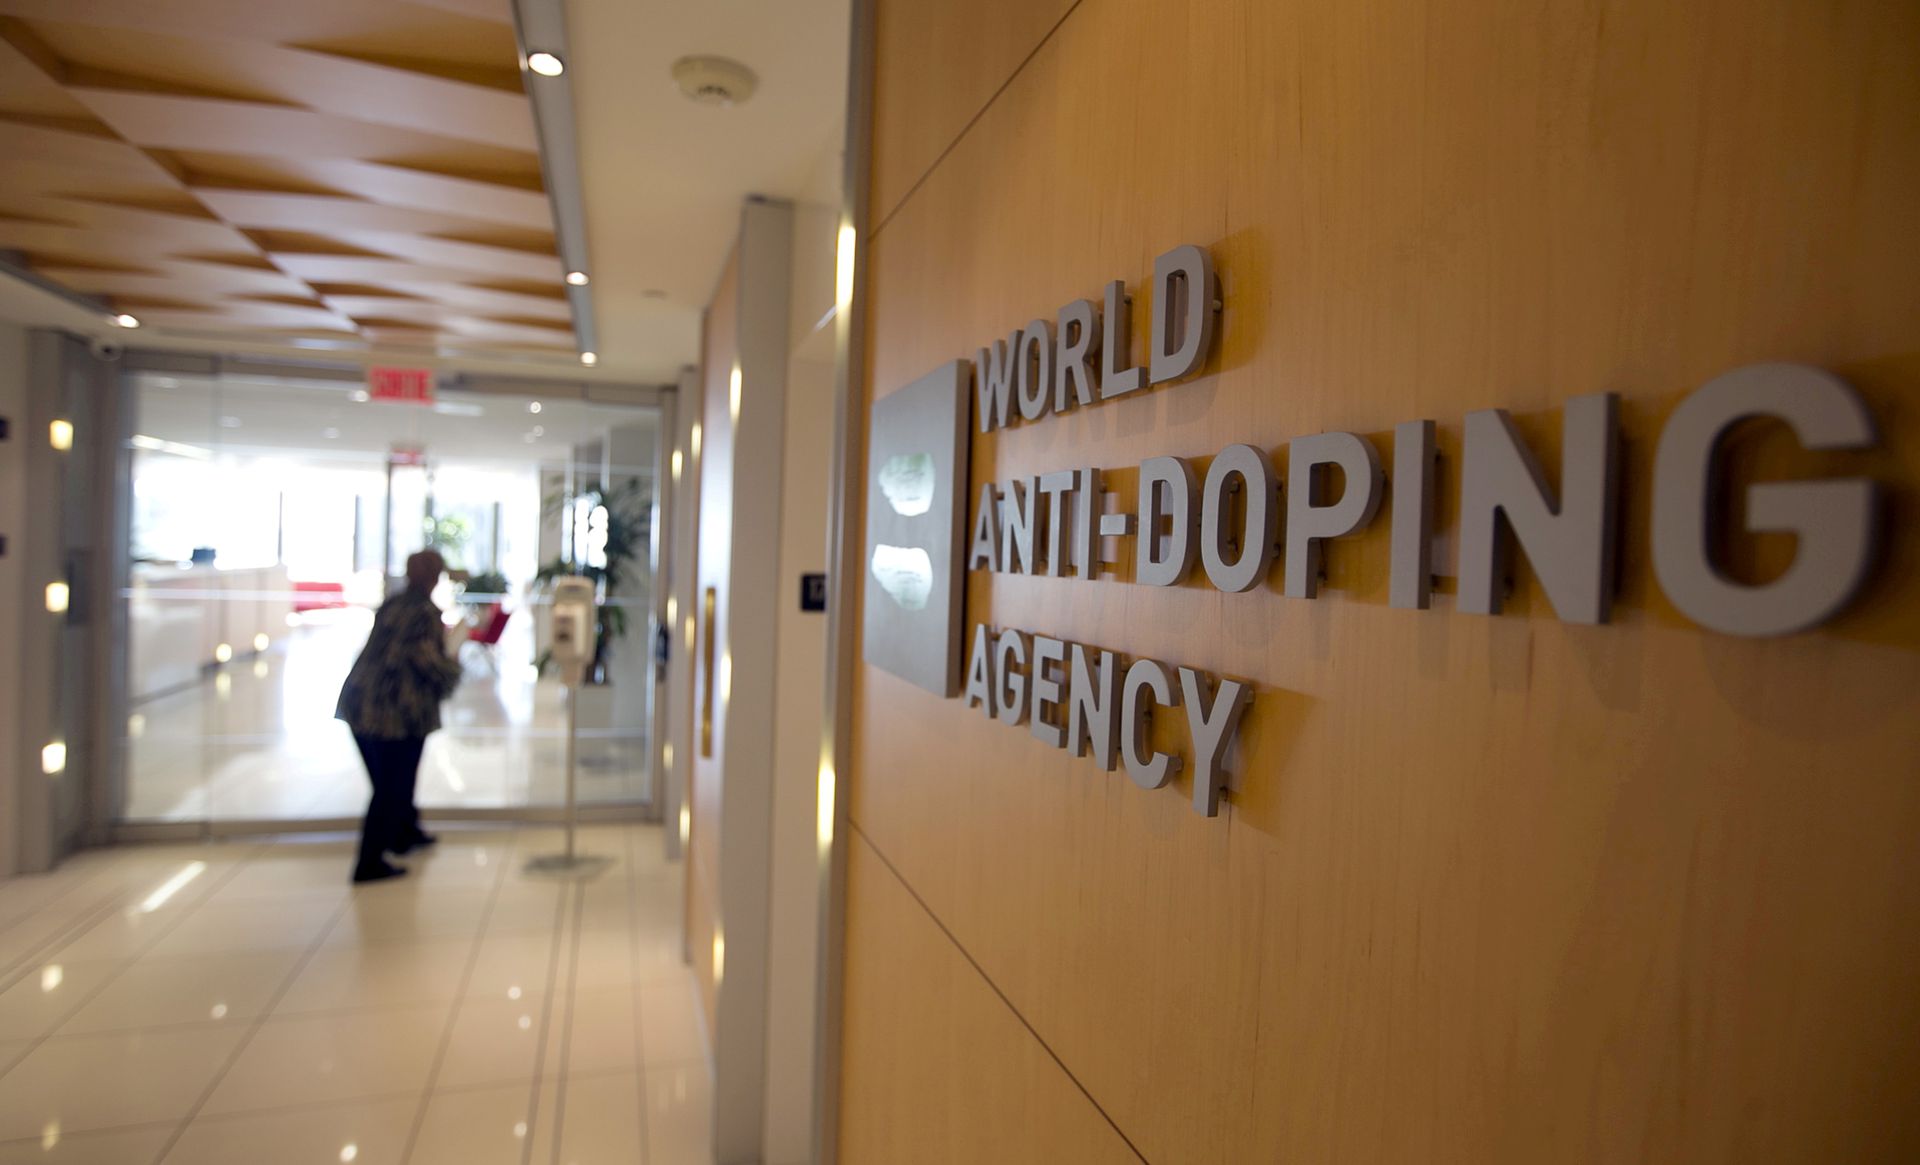 Russia Doping BAN: No relief for RUSADA even after expiration of Russia doping ban in December, confirms WADA President - CHECK out